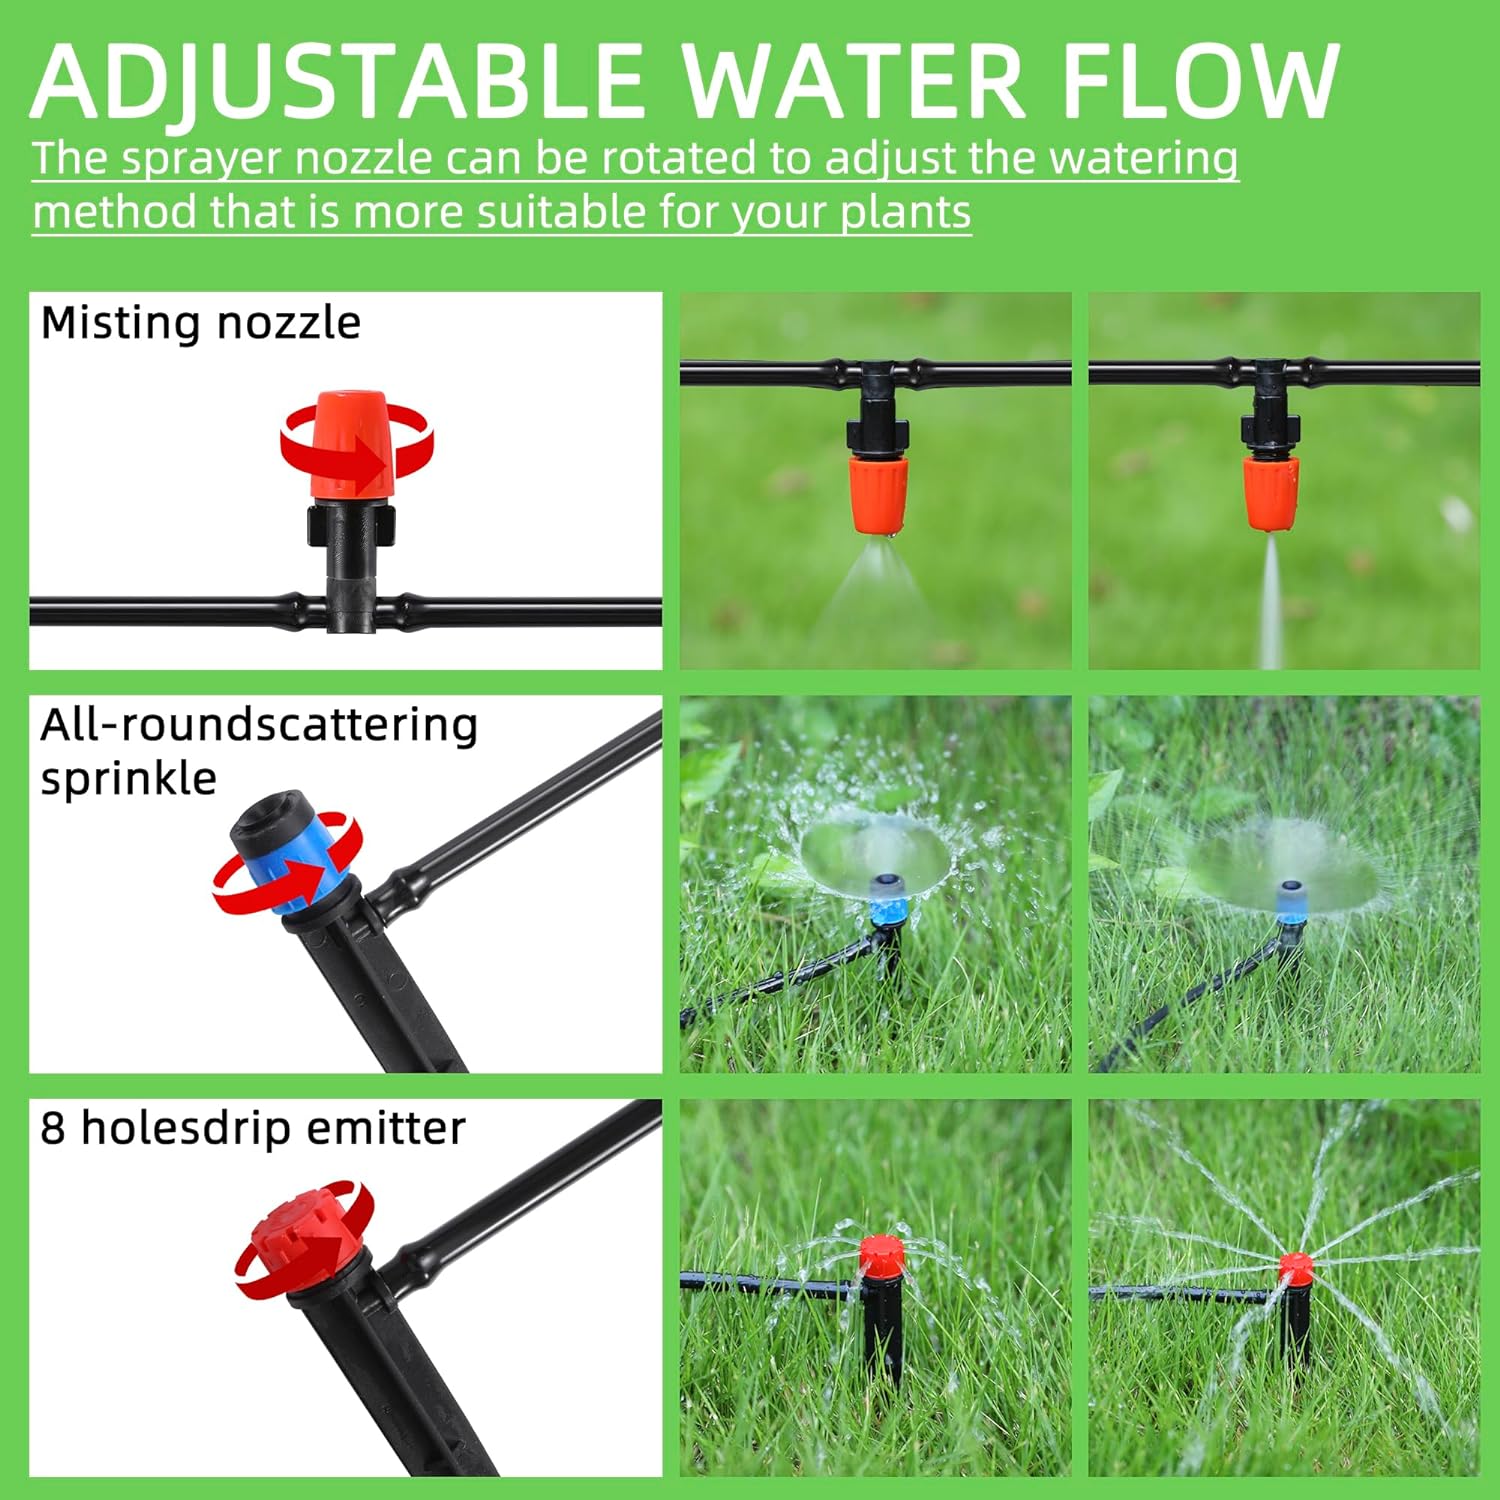 240FT Drip Irrigation Kit, Plant Watering System, Automatic Irrigation System with 40FT (1/2) Hose and 200FT (1/4) Distribution Tubing for Garden, Greenhouse Flower, Flower Bed Patio, Lawn Watering